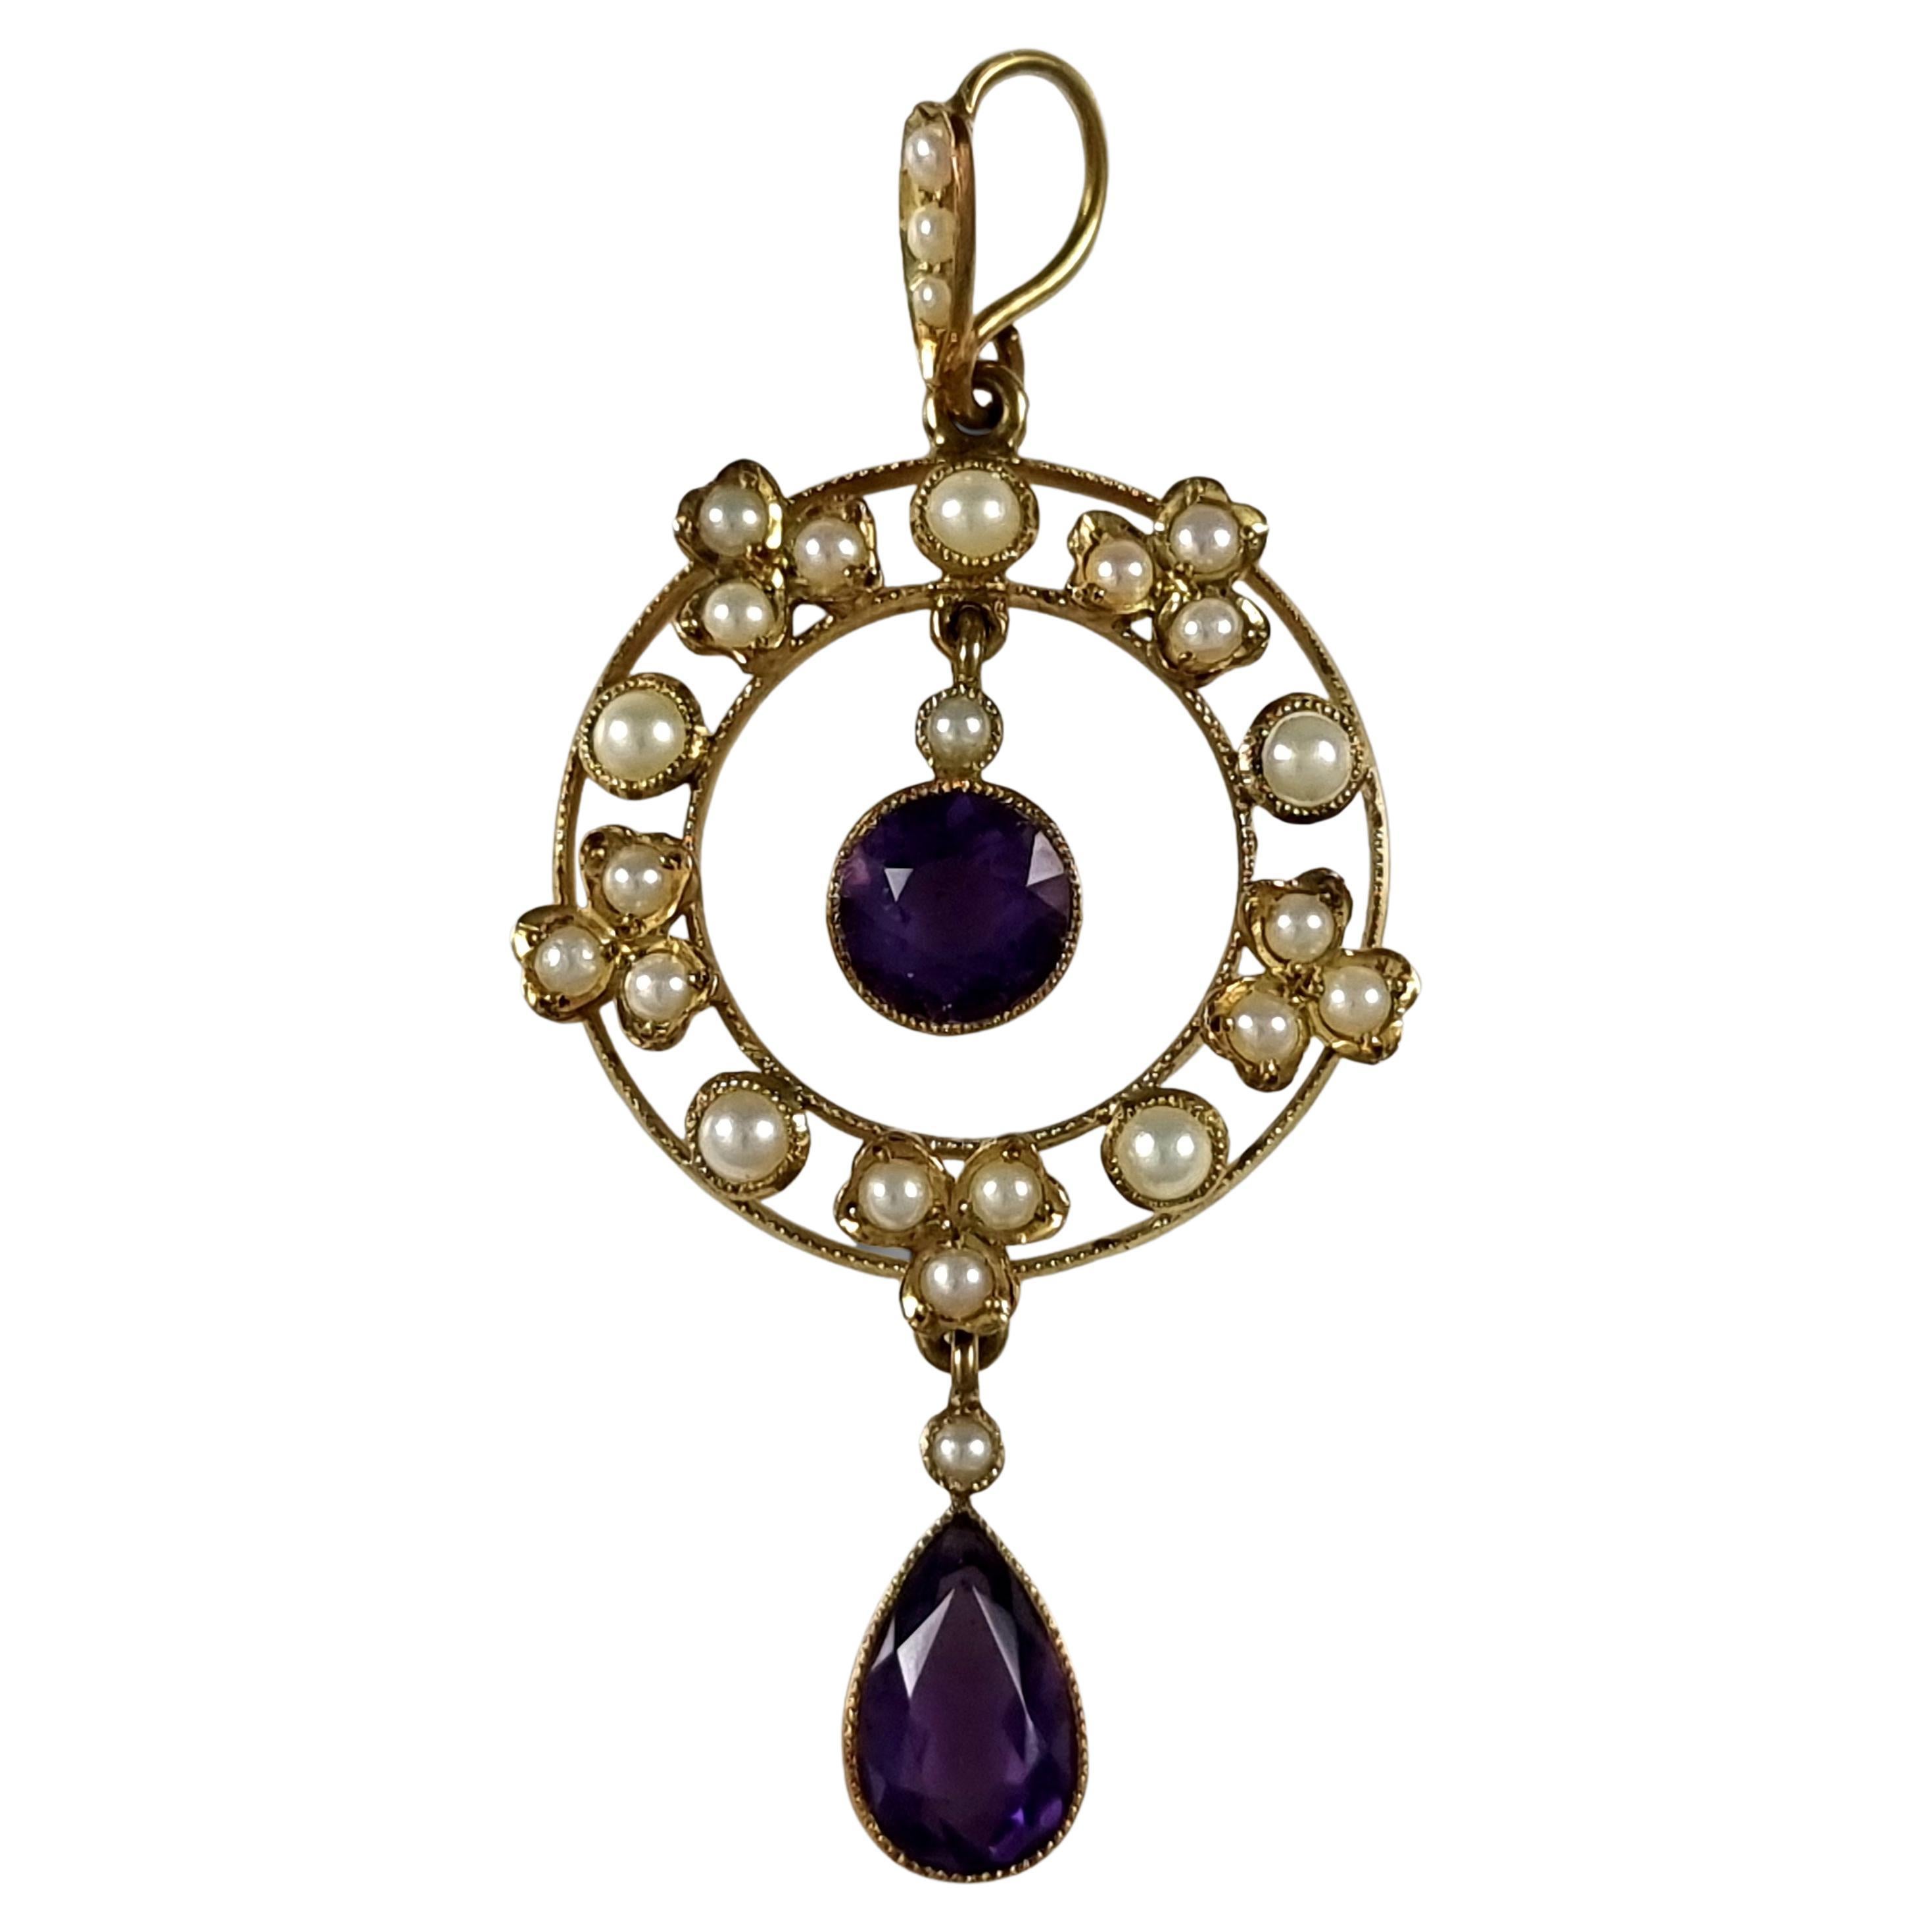 Edwardian 15ct Gold Amethyst and Seed Pearl Pendant